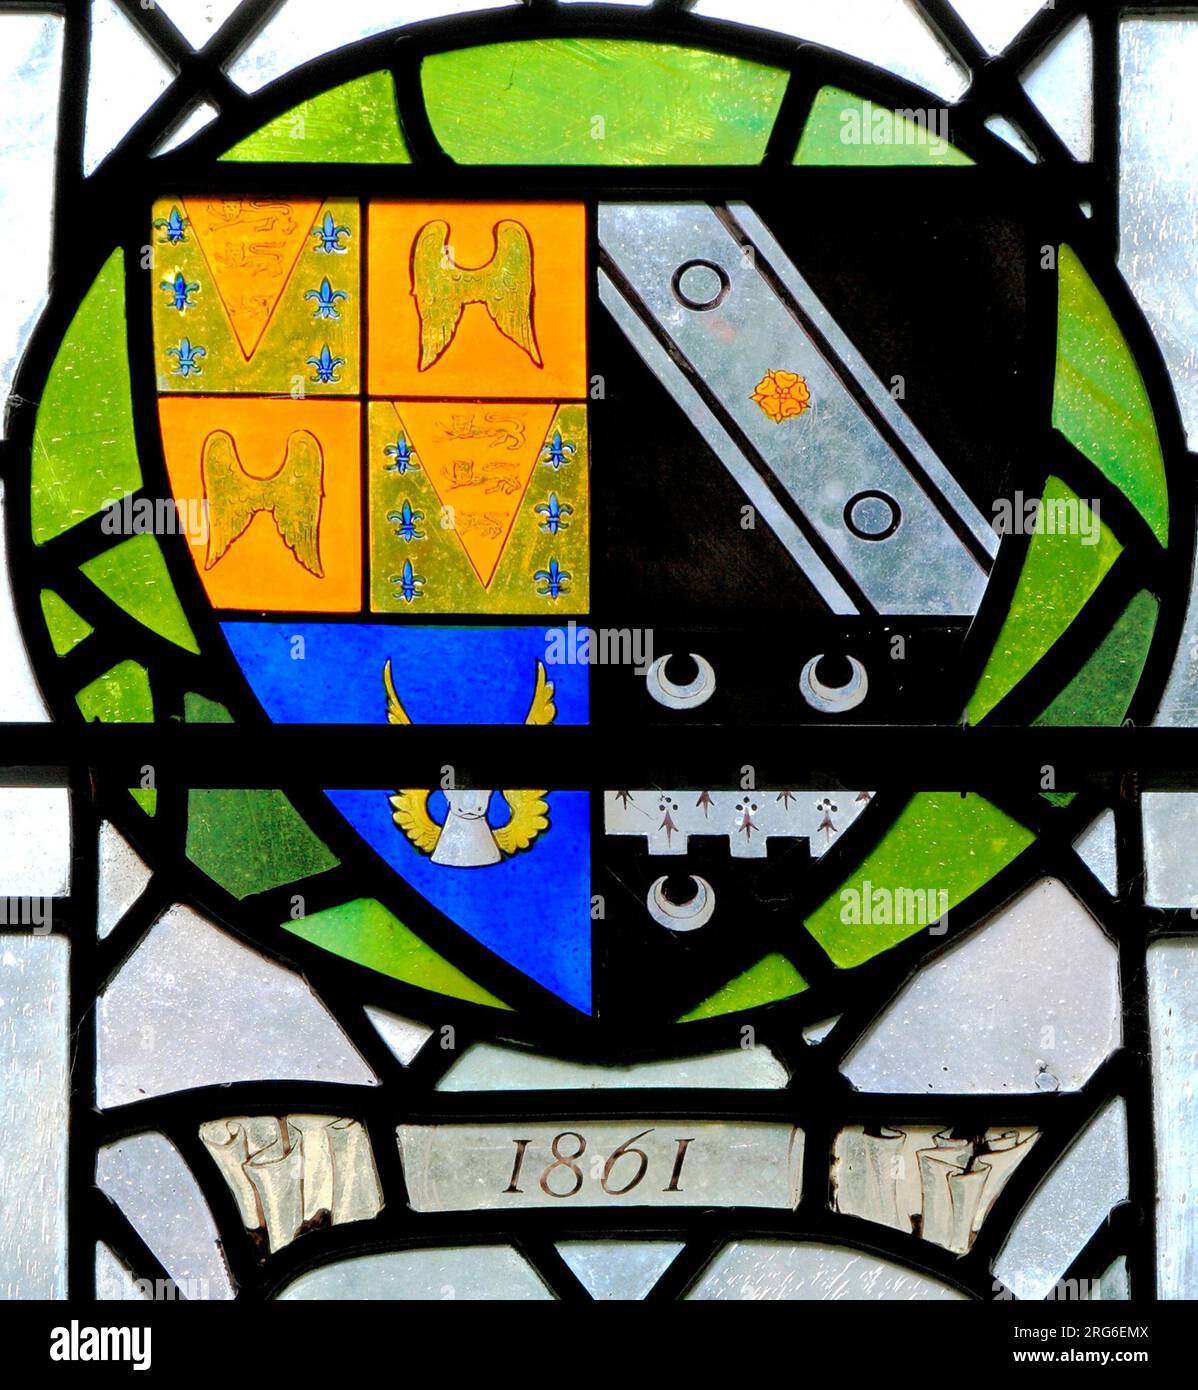 Stanhoe, Norfolk, Arms of George Henry Seymour  1861, quartered with Conway Glover and Hoste families, heraldry, heraldic shield device, stained glass Stock Photo